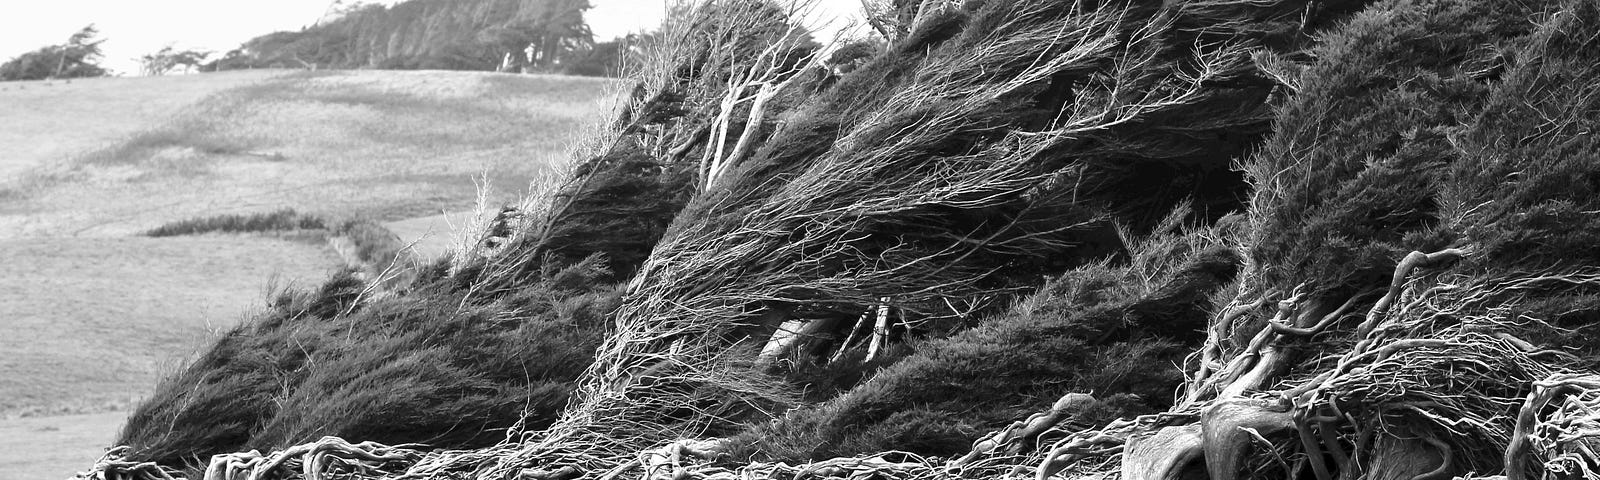 A row of low trees blasted by the wind. Black and white photo.